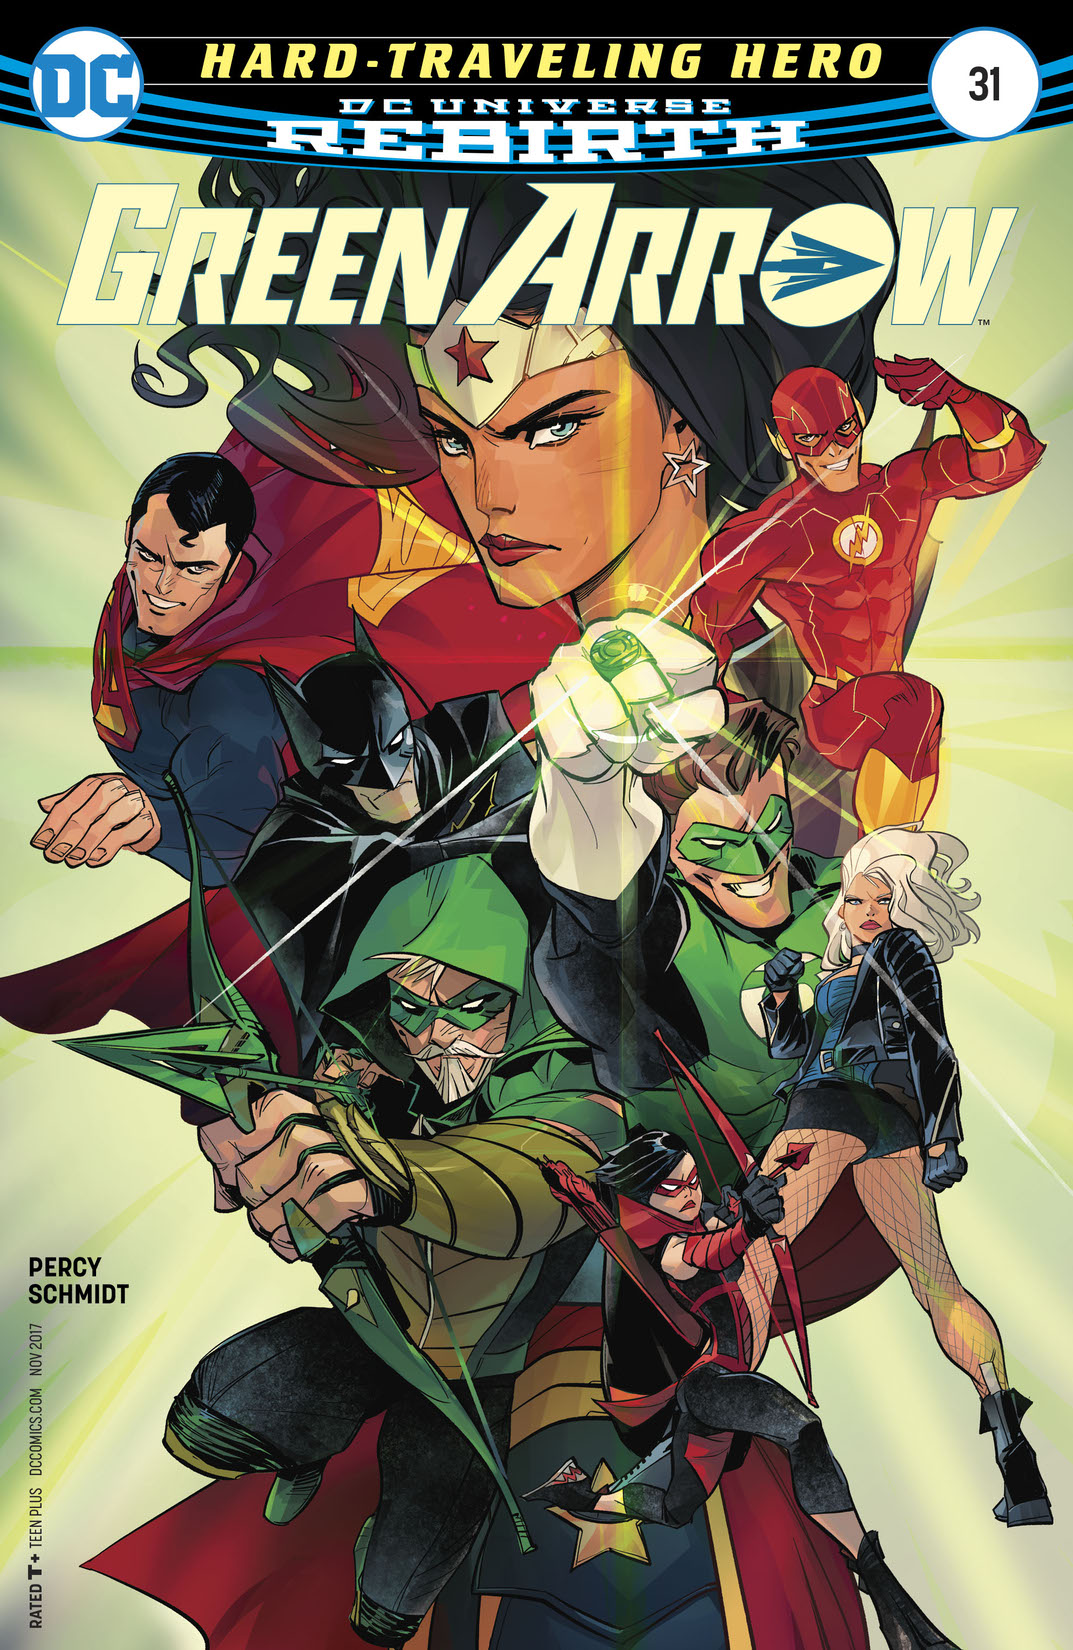 Green Arrow (2016-) #31 preview images